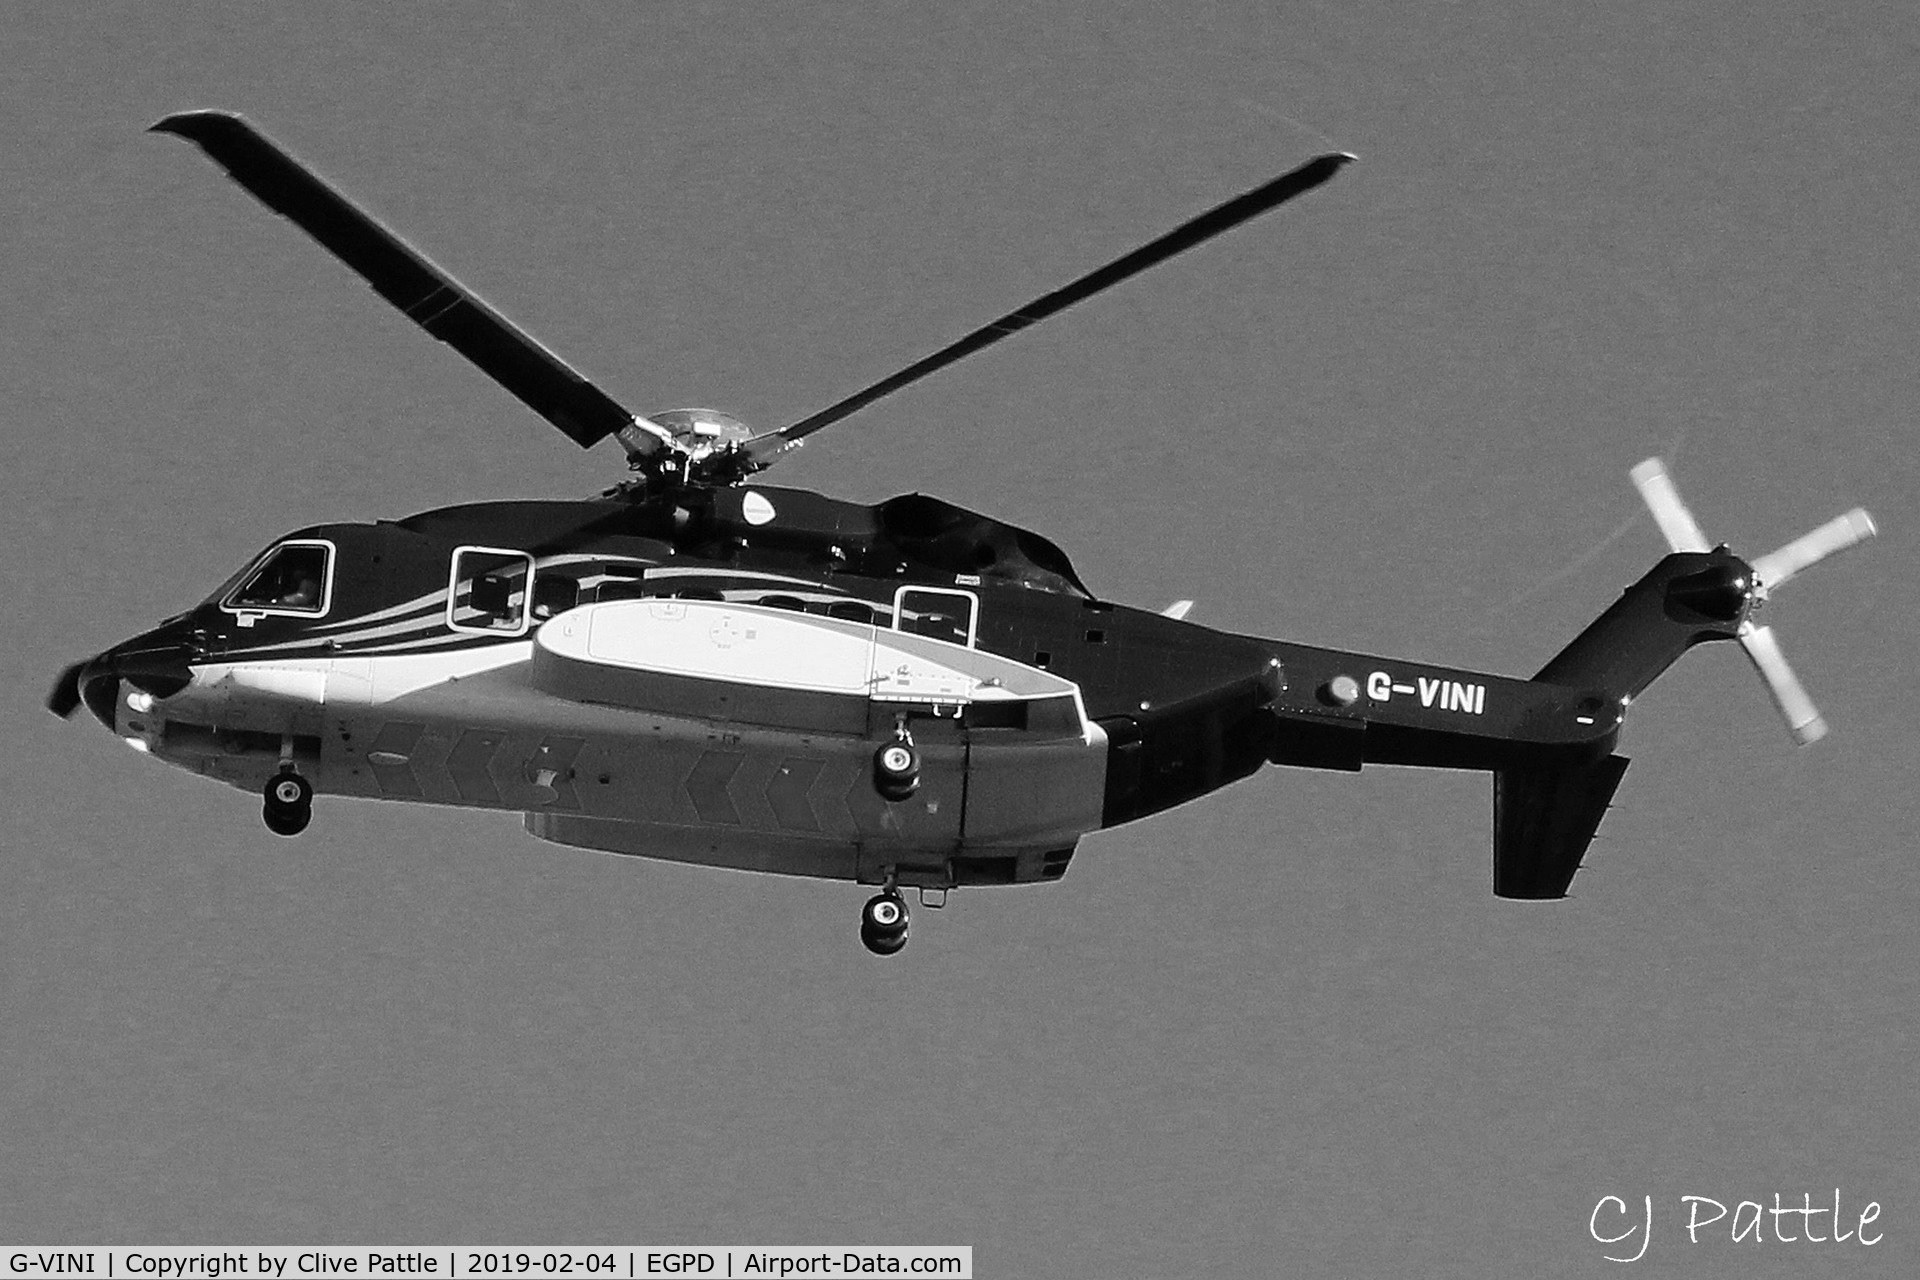 G-VINI, 2013 Sikorsky S-92A C/N 920220, Monochrome departure from Aberdeen